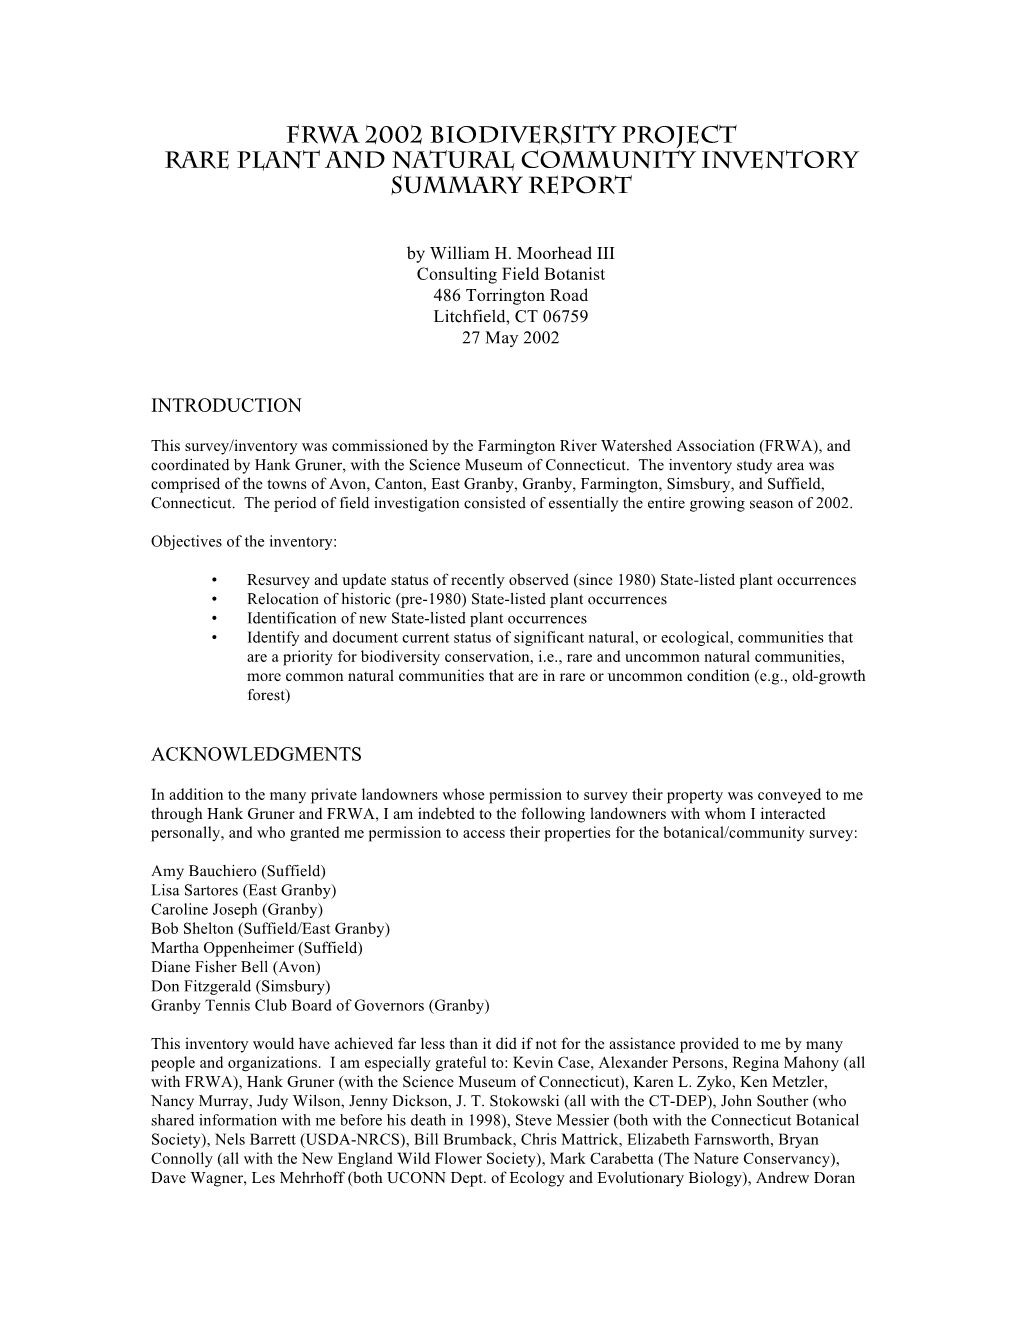 FRWA 2002 Biodiversity Project Rare Plant and Natural Community Inventory Summary Report